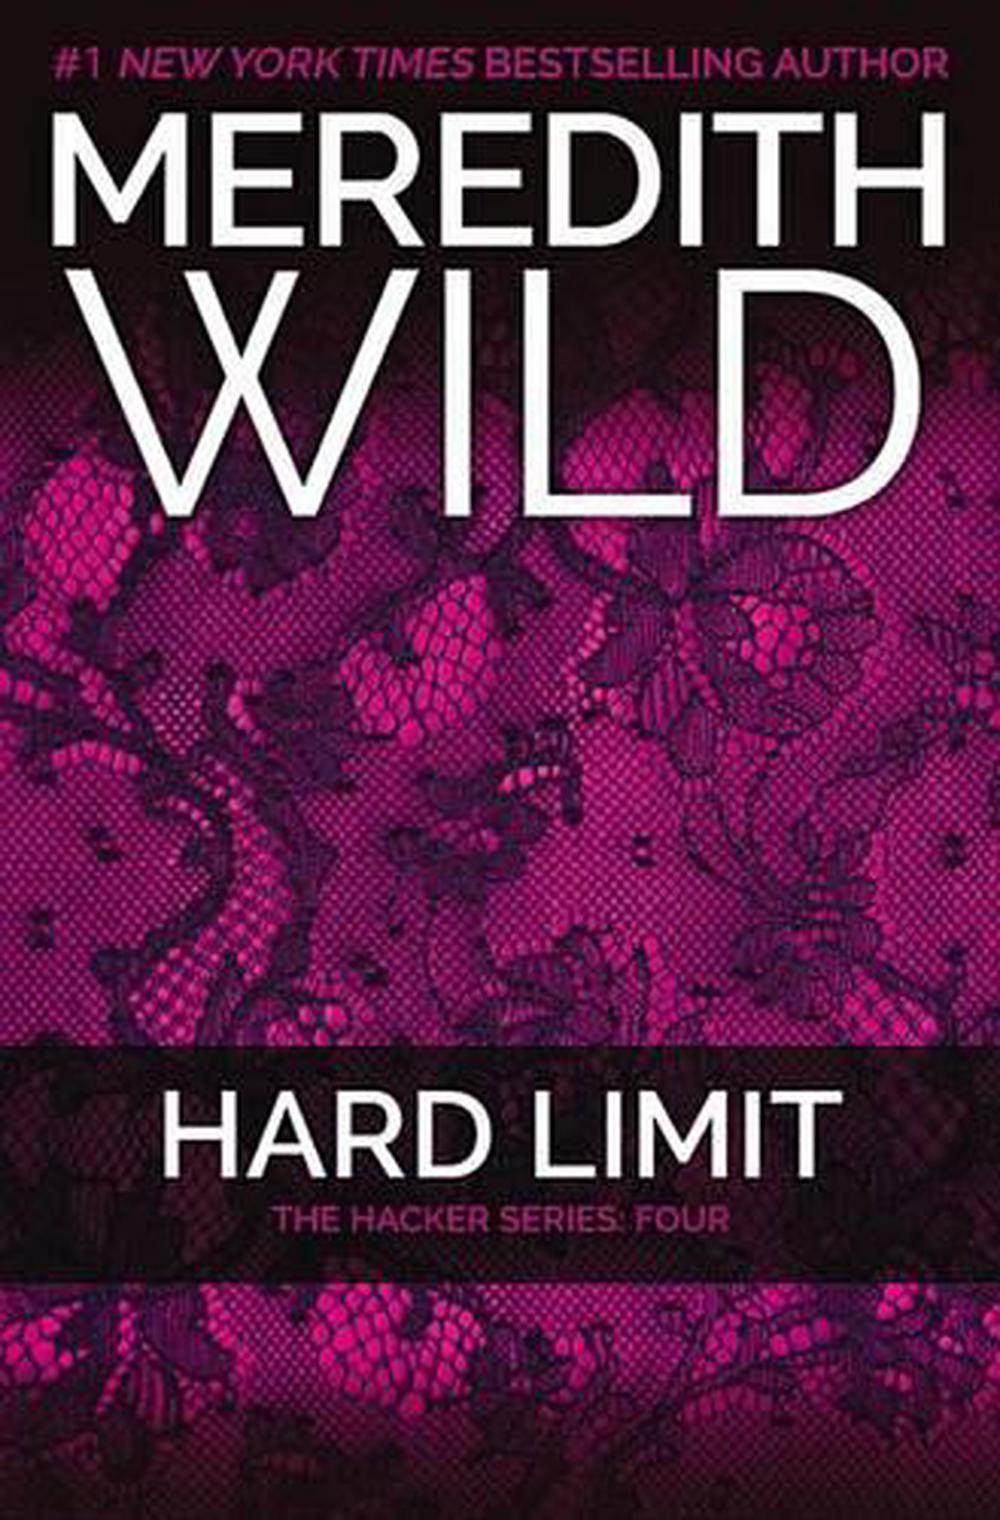 Hard Limit Subtitle The Hacker Series 4 by Meredith Wild (English) Paperback 9781455591817 eBay